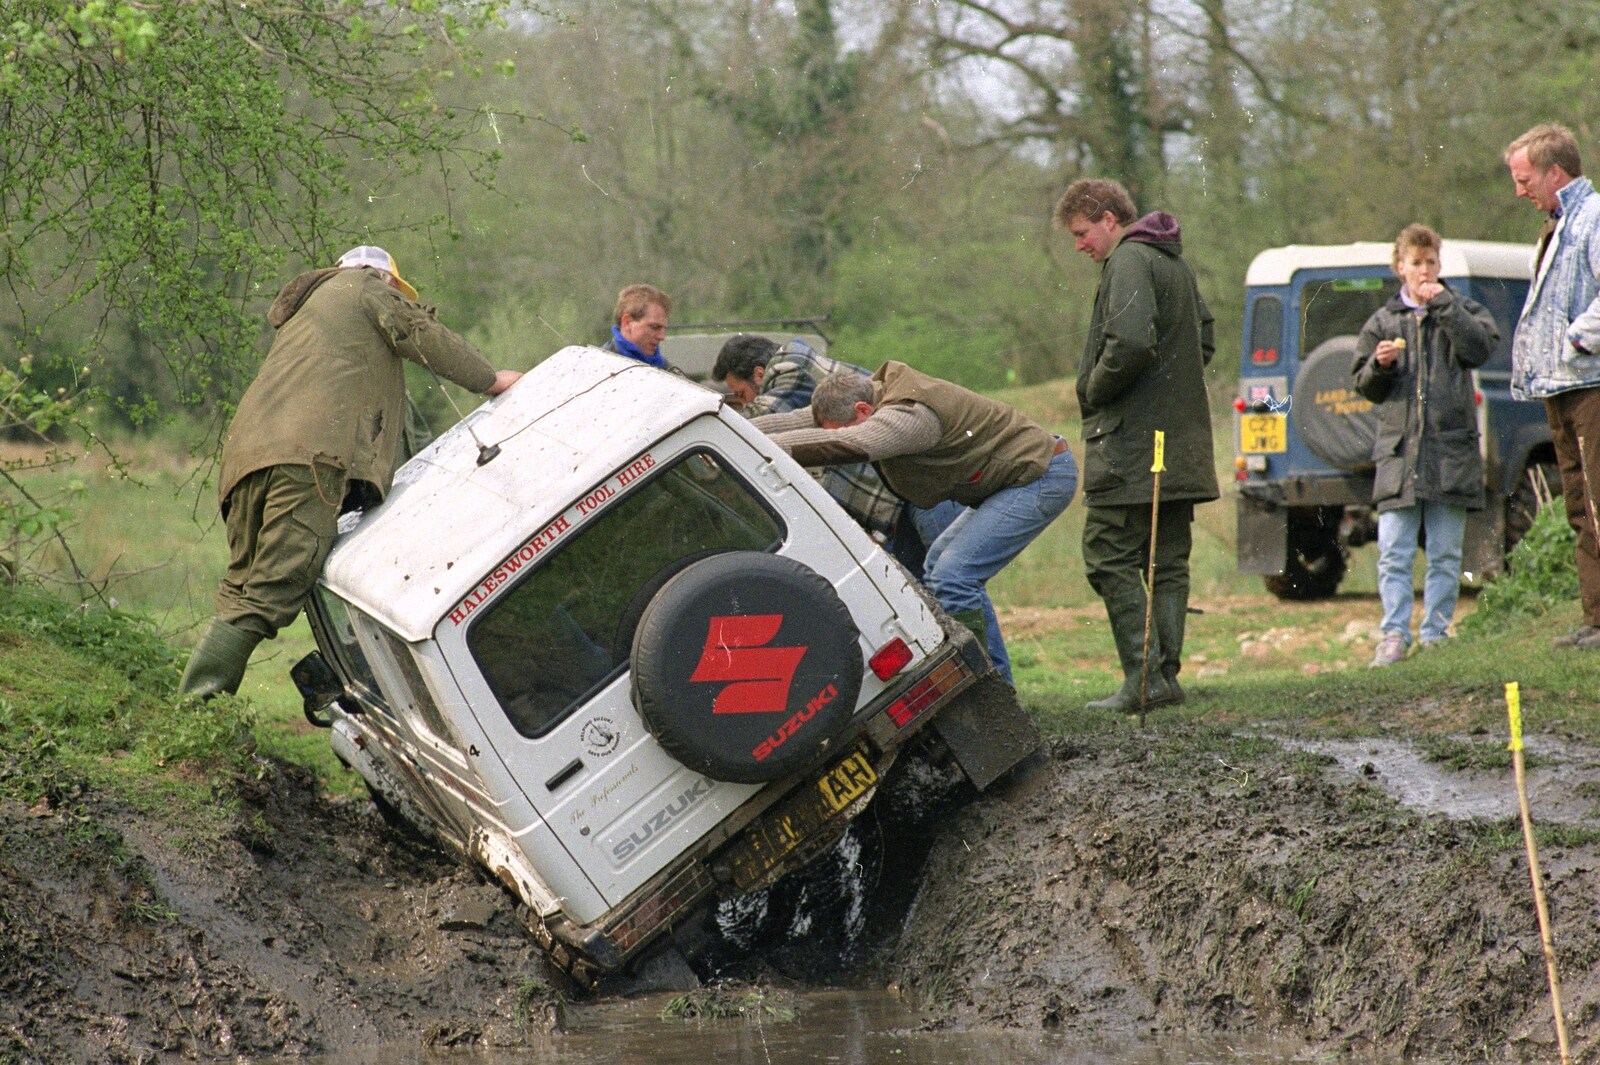 A Halesworth Tool Hire Suzuki gets stuck from The Newmarket Dog Show and Dobermans on the Ling, Newmarket and Wortham, Suffolk - 3rd April 1991